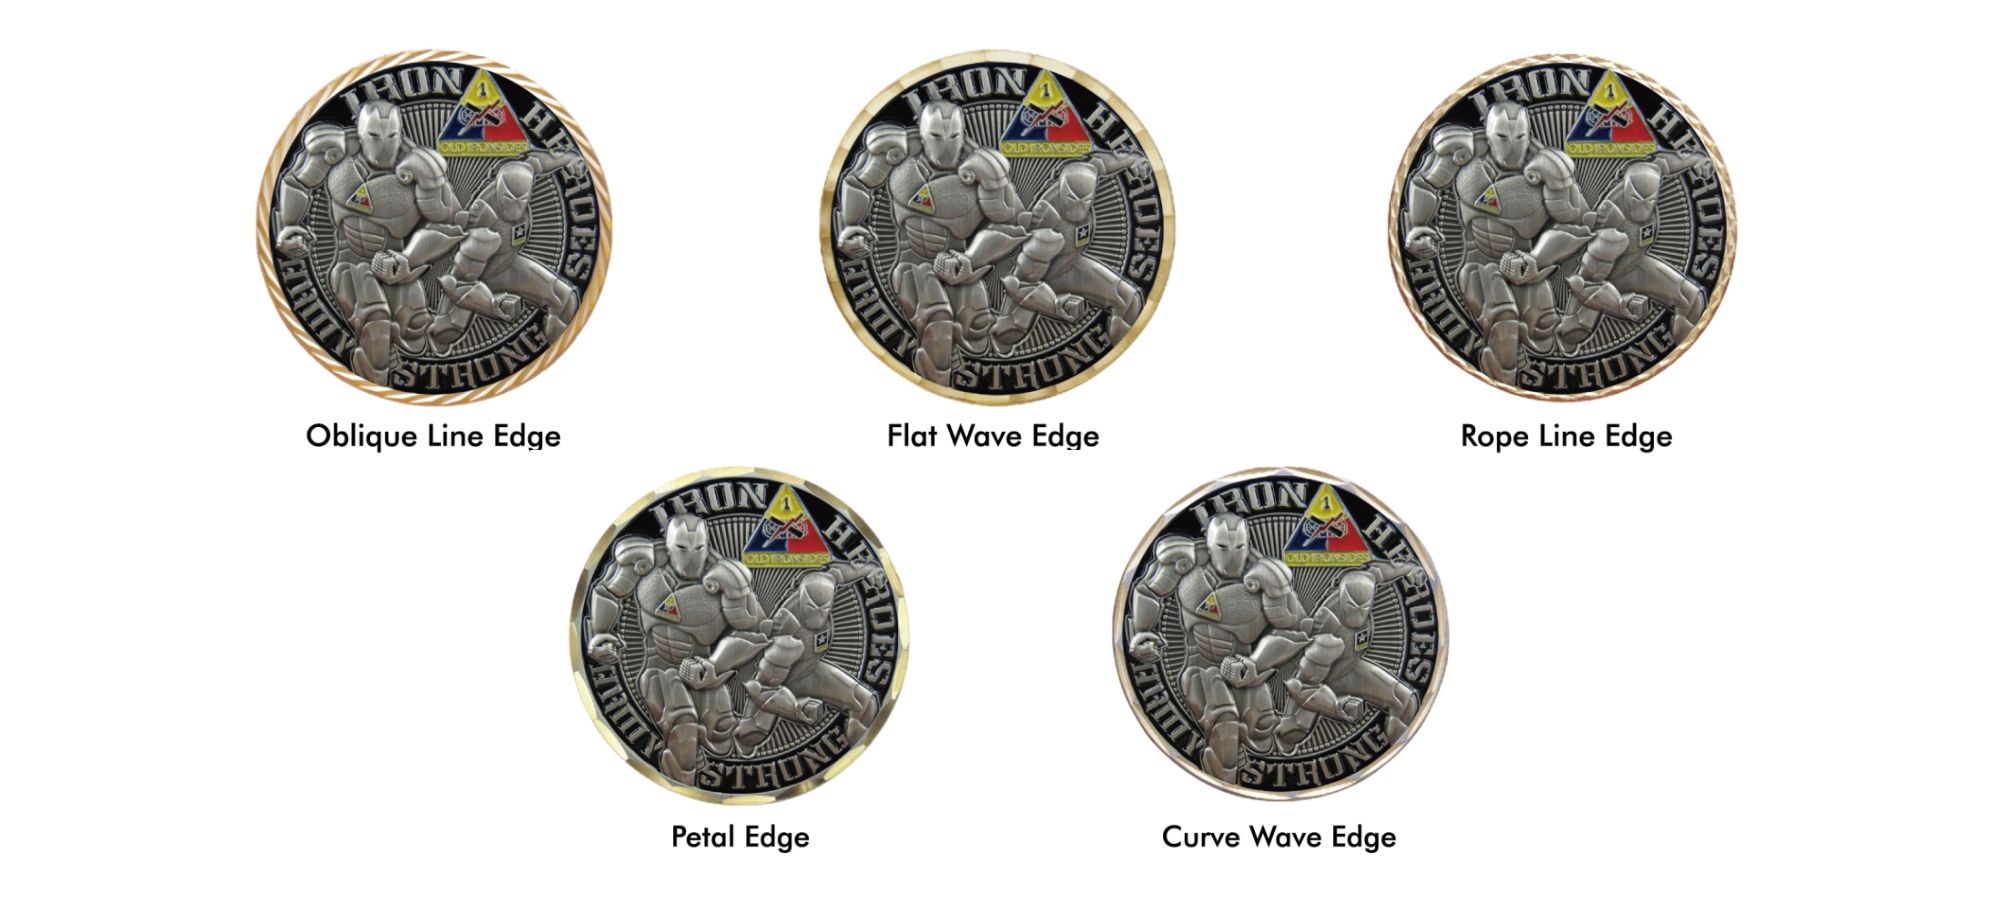 With our guidance, you can create your own coins that reflect your unique style and message.